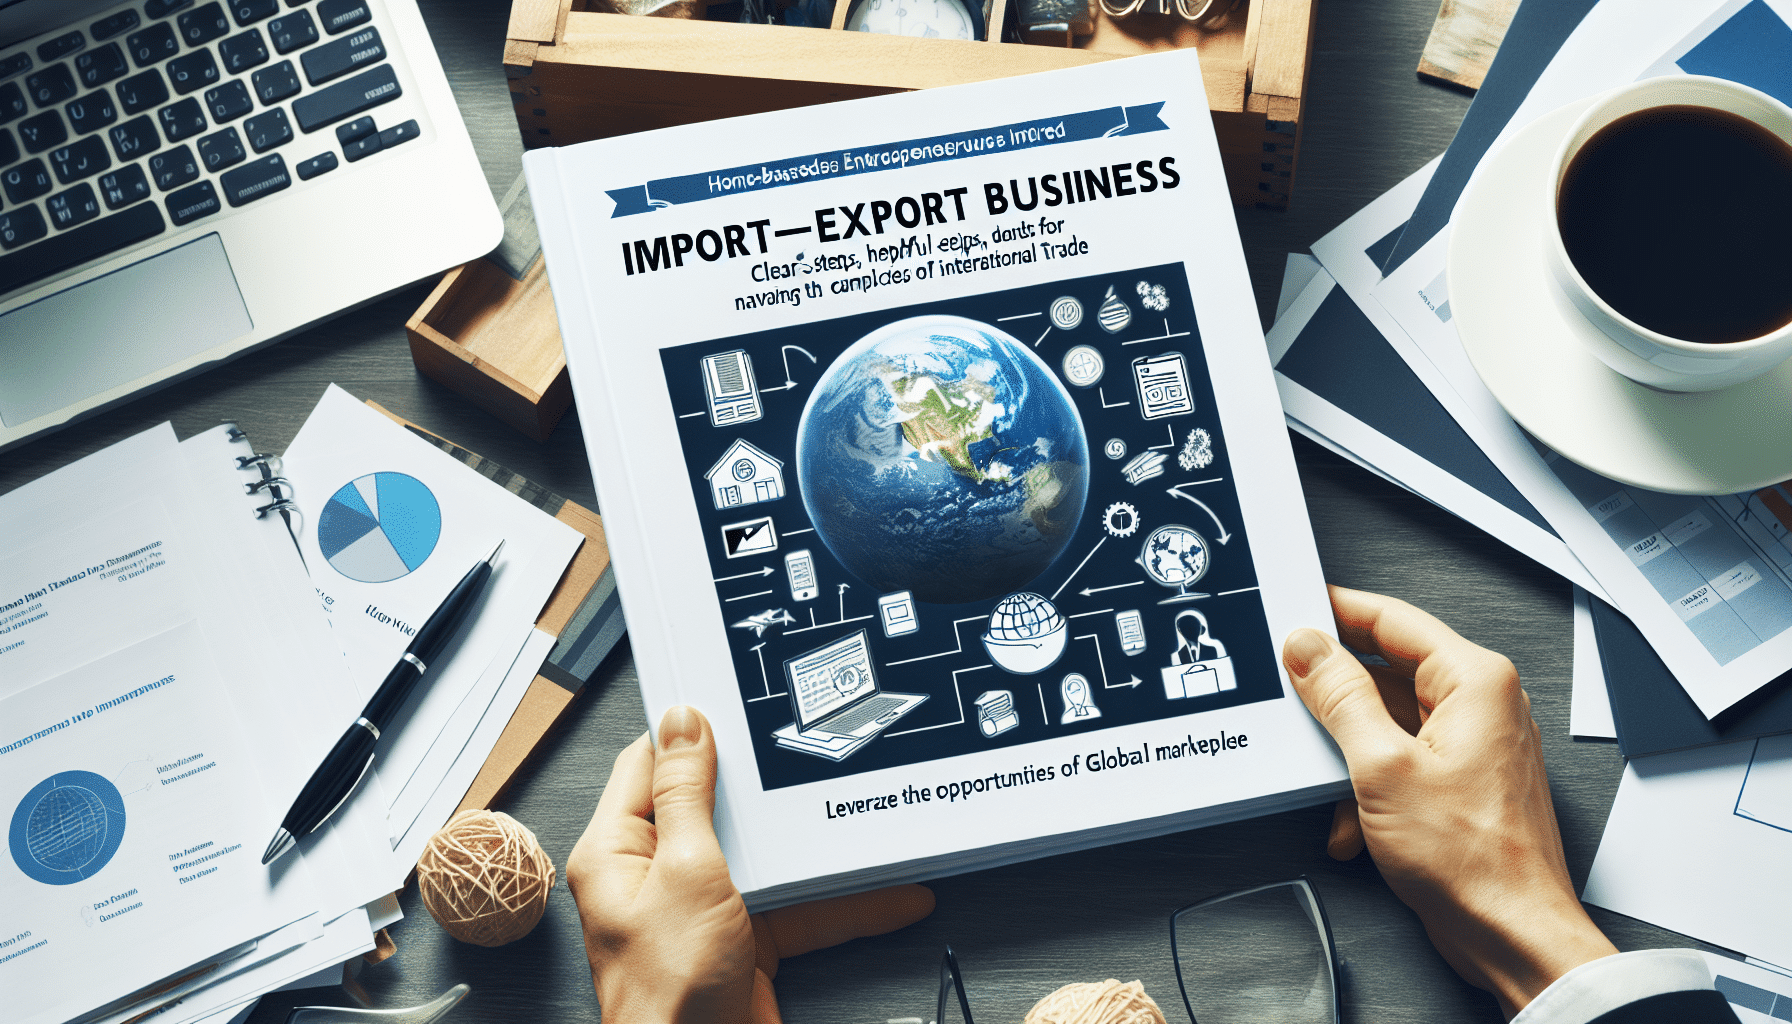 How to Start an Import Export Business from Home